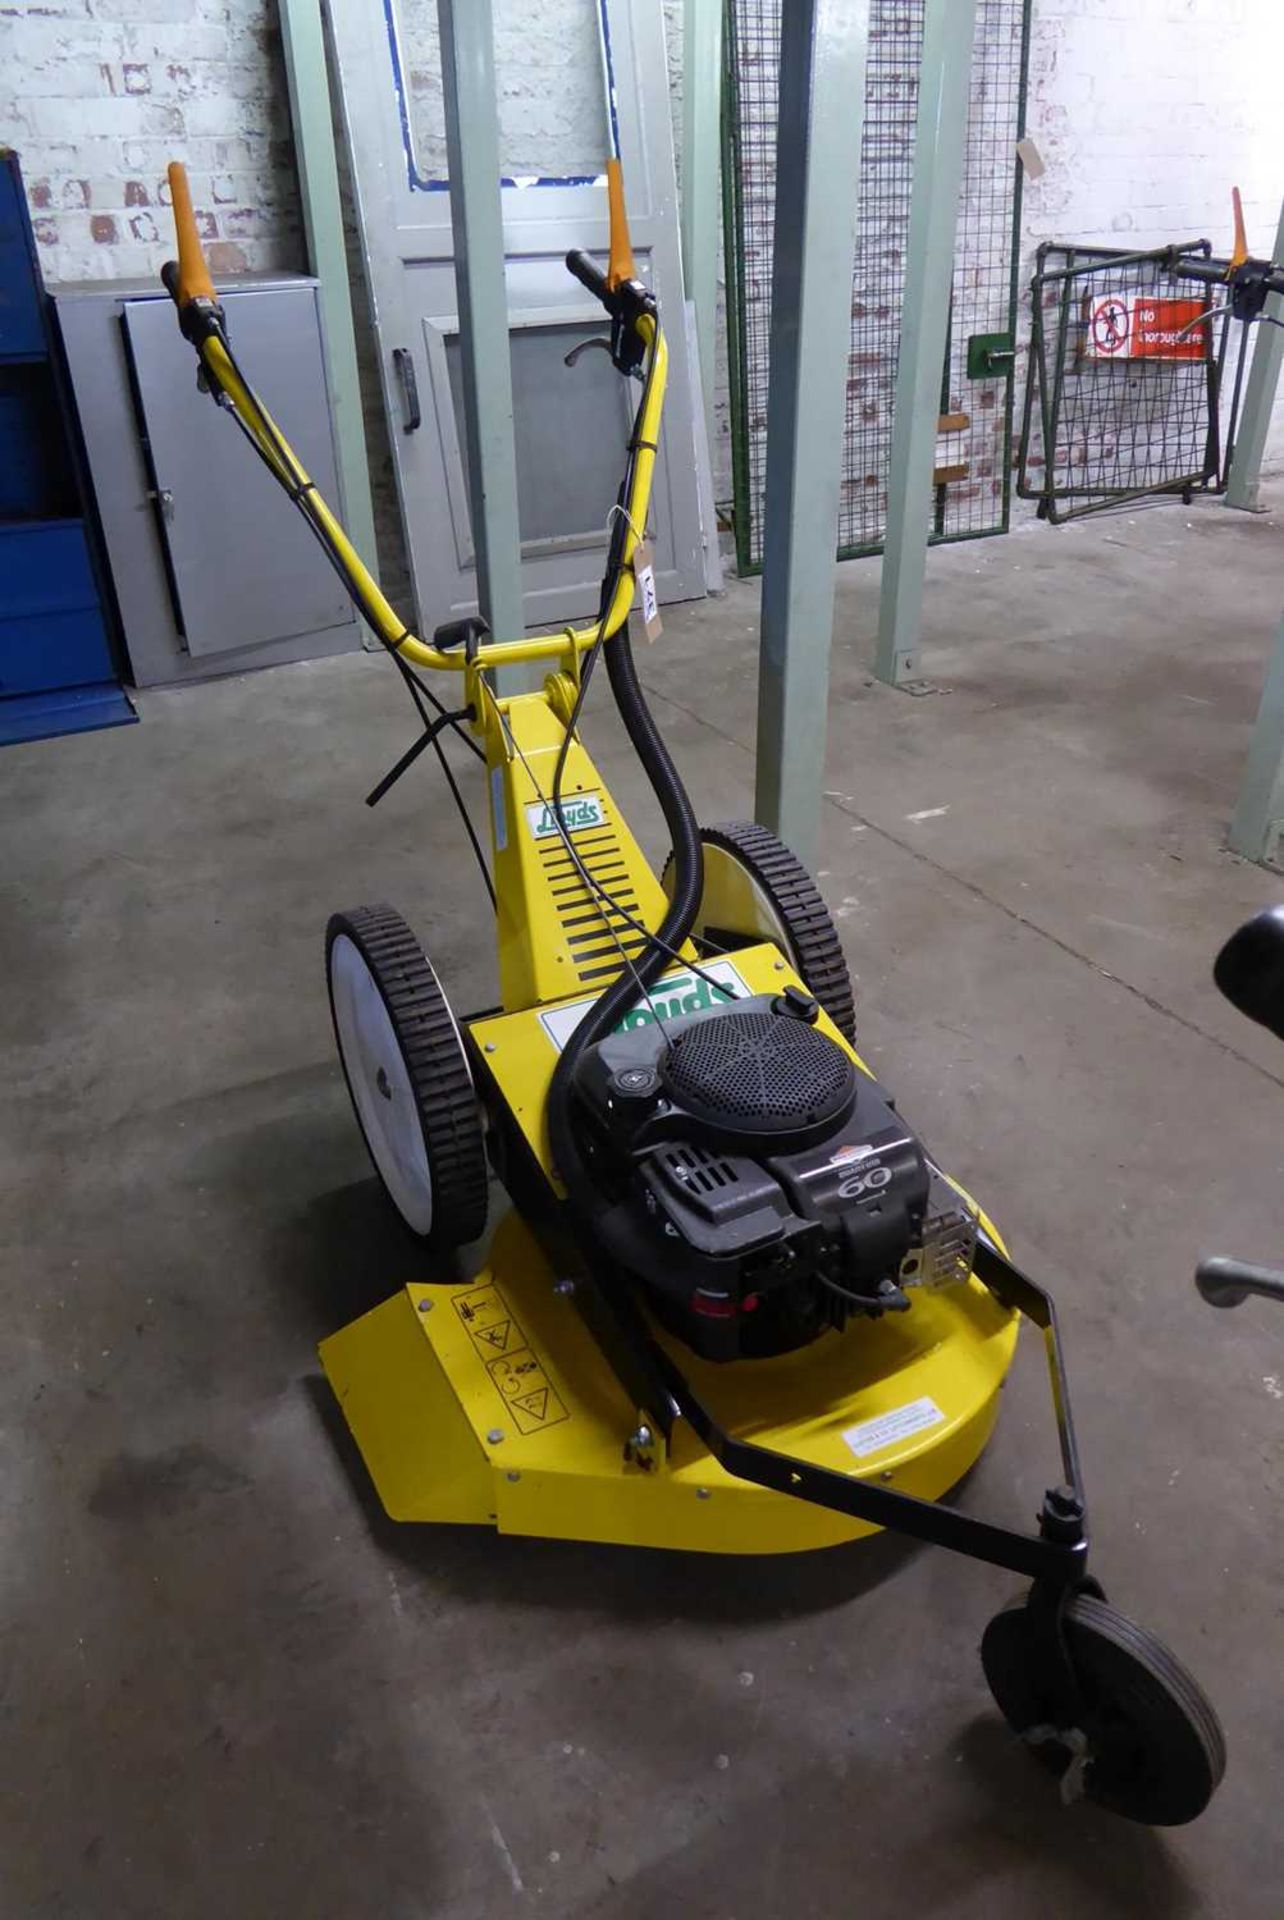 +VAT Lloyds rough cut rotary mower finished in yellow - Briggs & Stratton Quantum 60 petrol engine